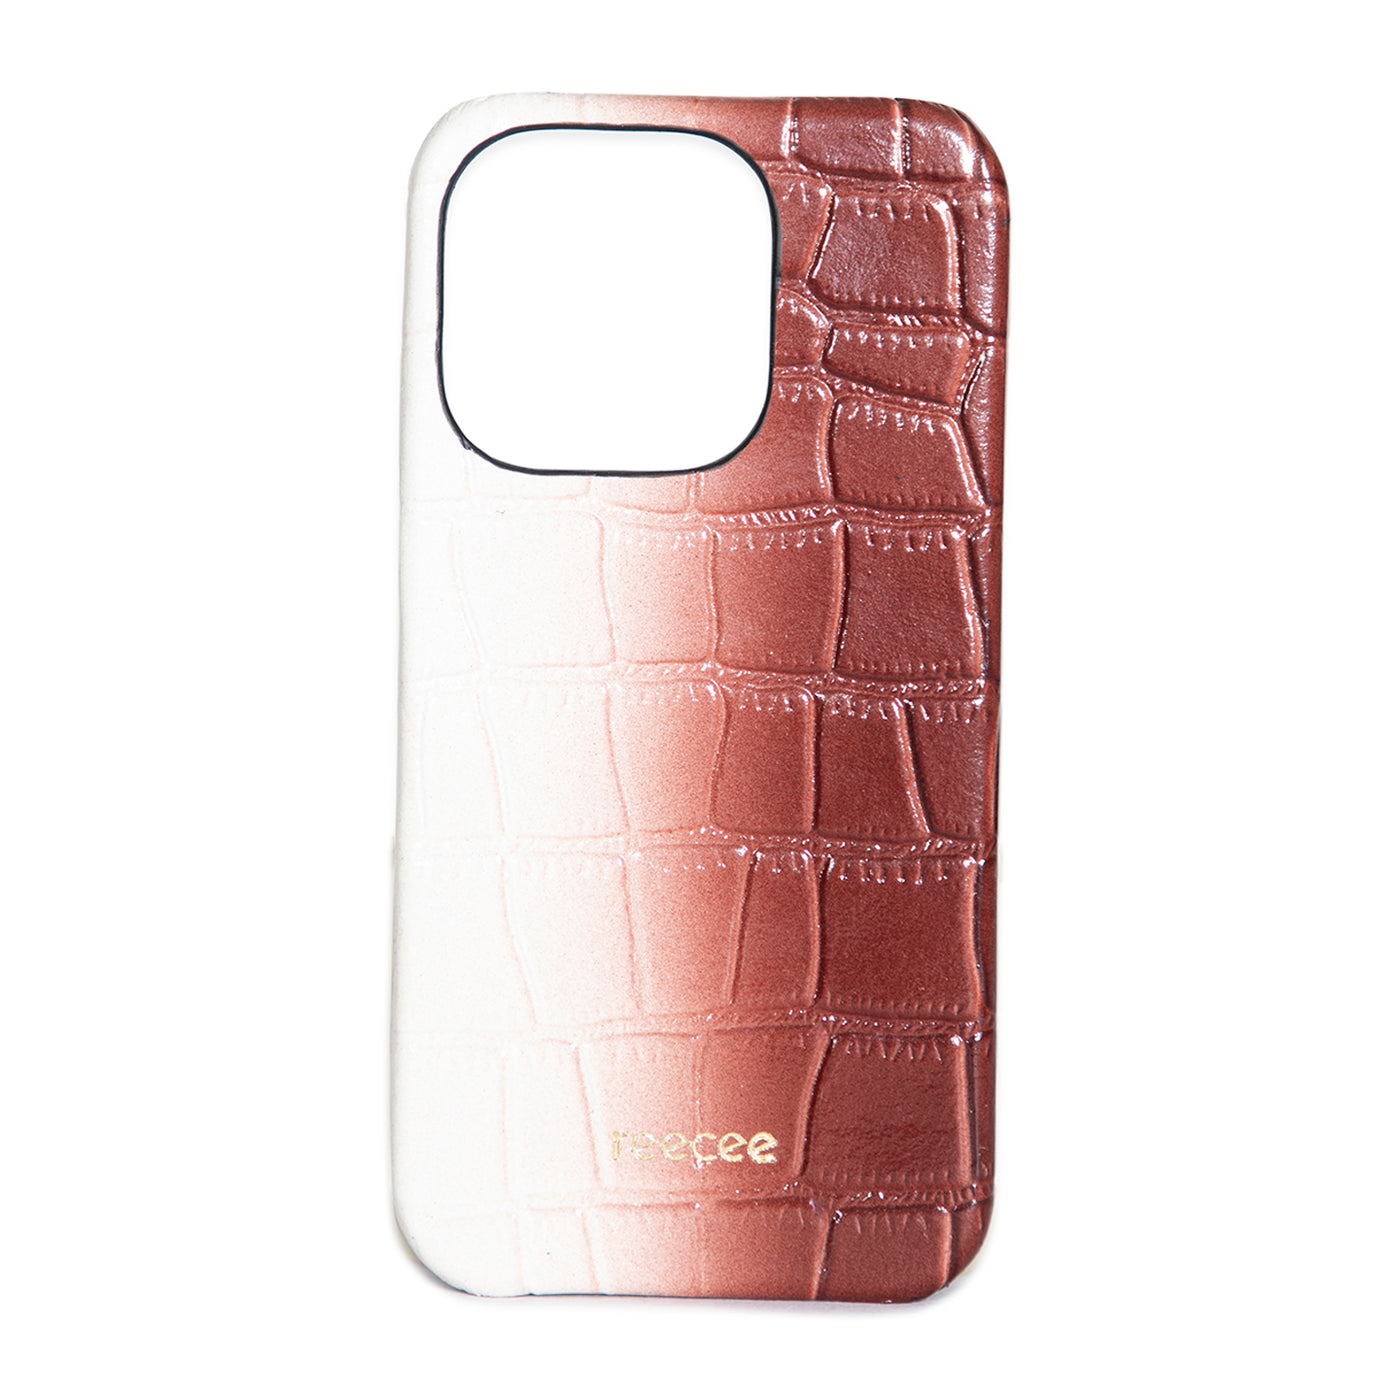 Ombre Burgundy Leather - iPhone 12/ 12 Pro Case